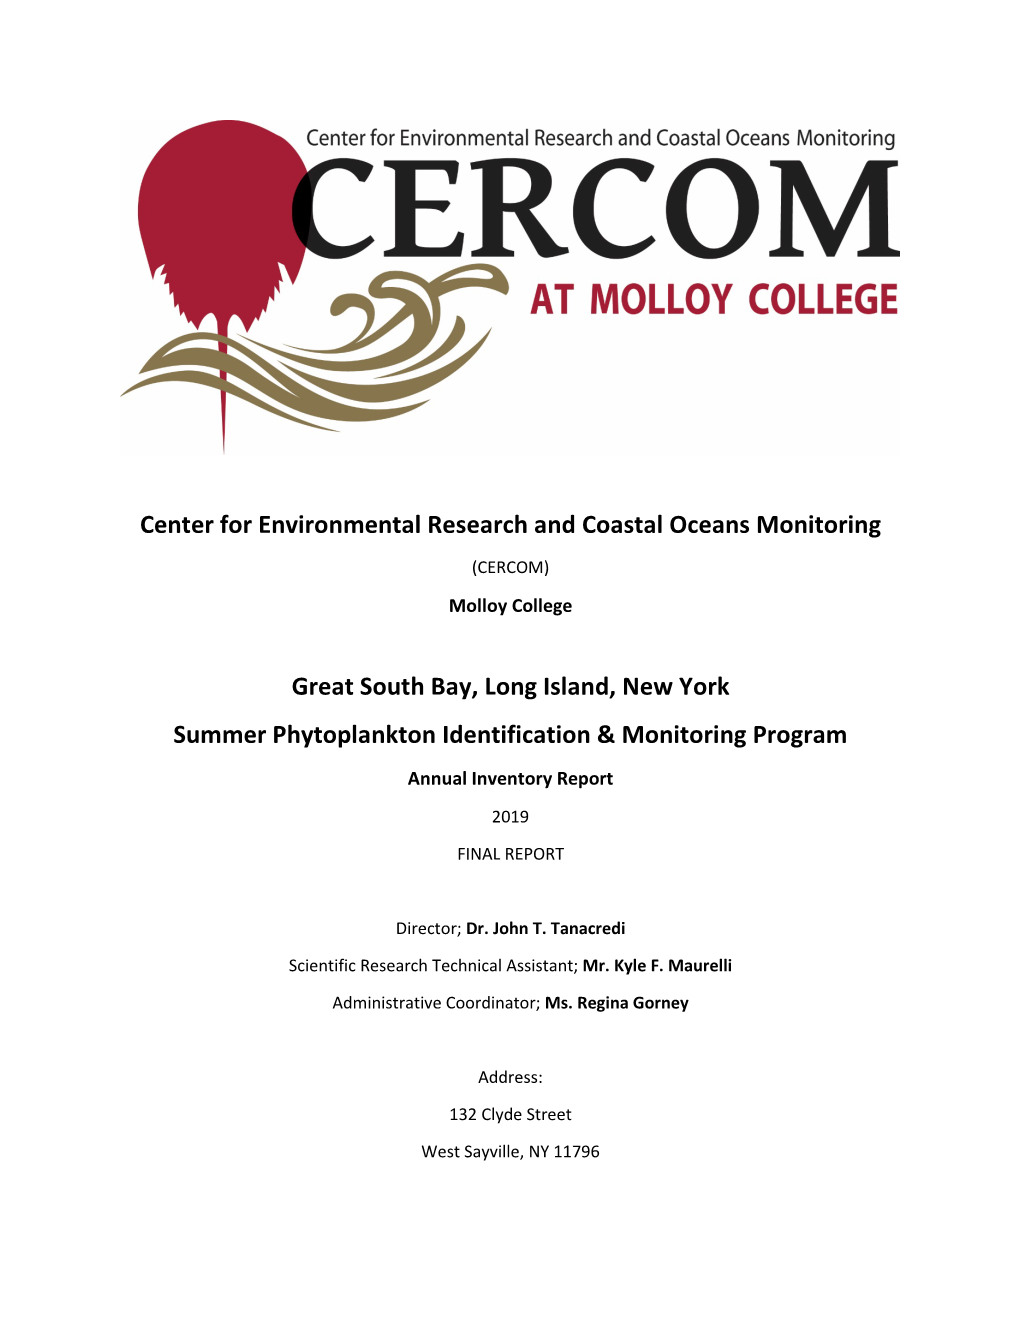 Center for Environmental Research and Coastal Oceans Monitoring (CERCOM)